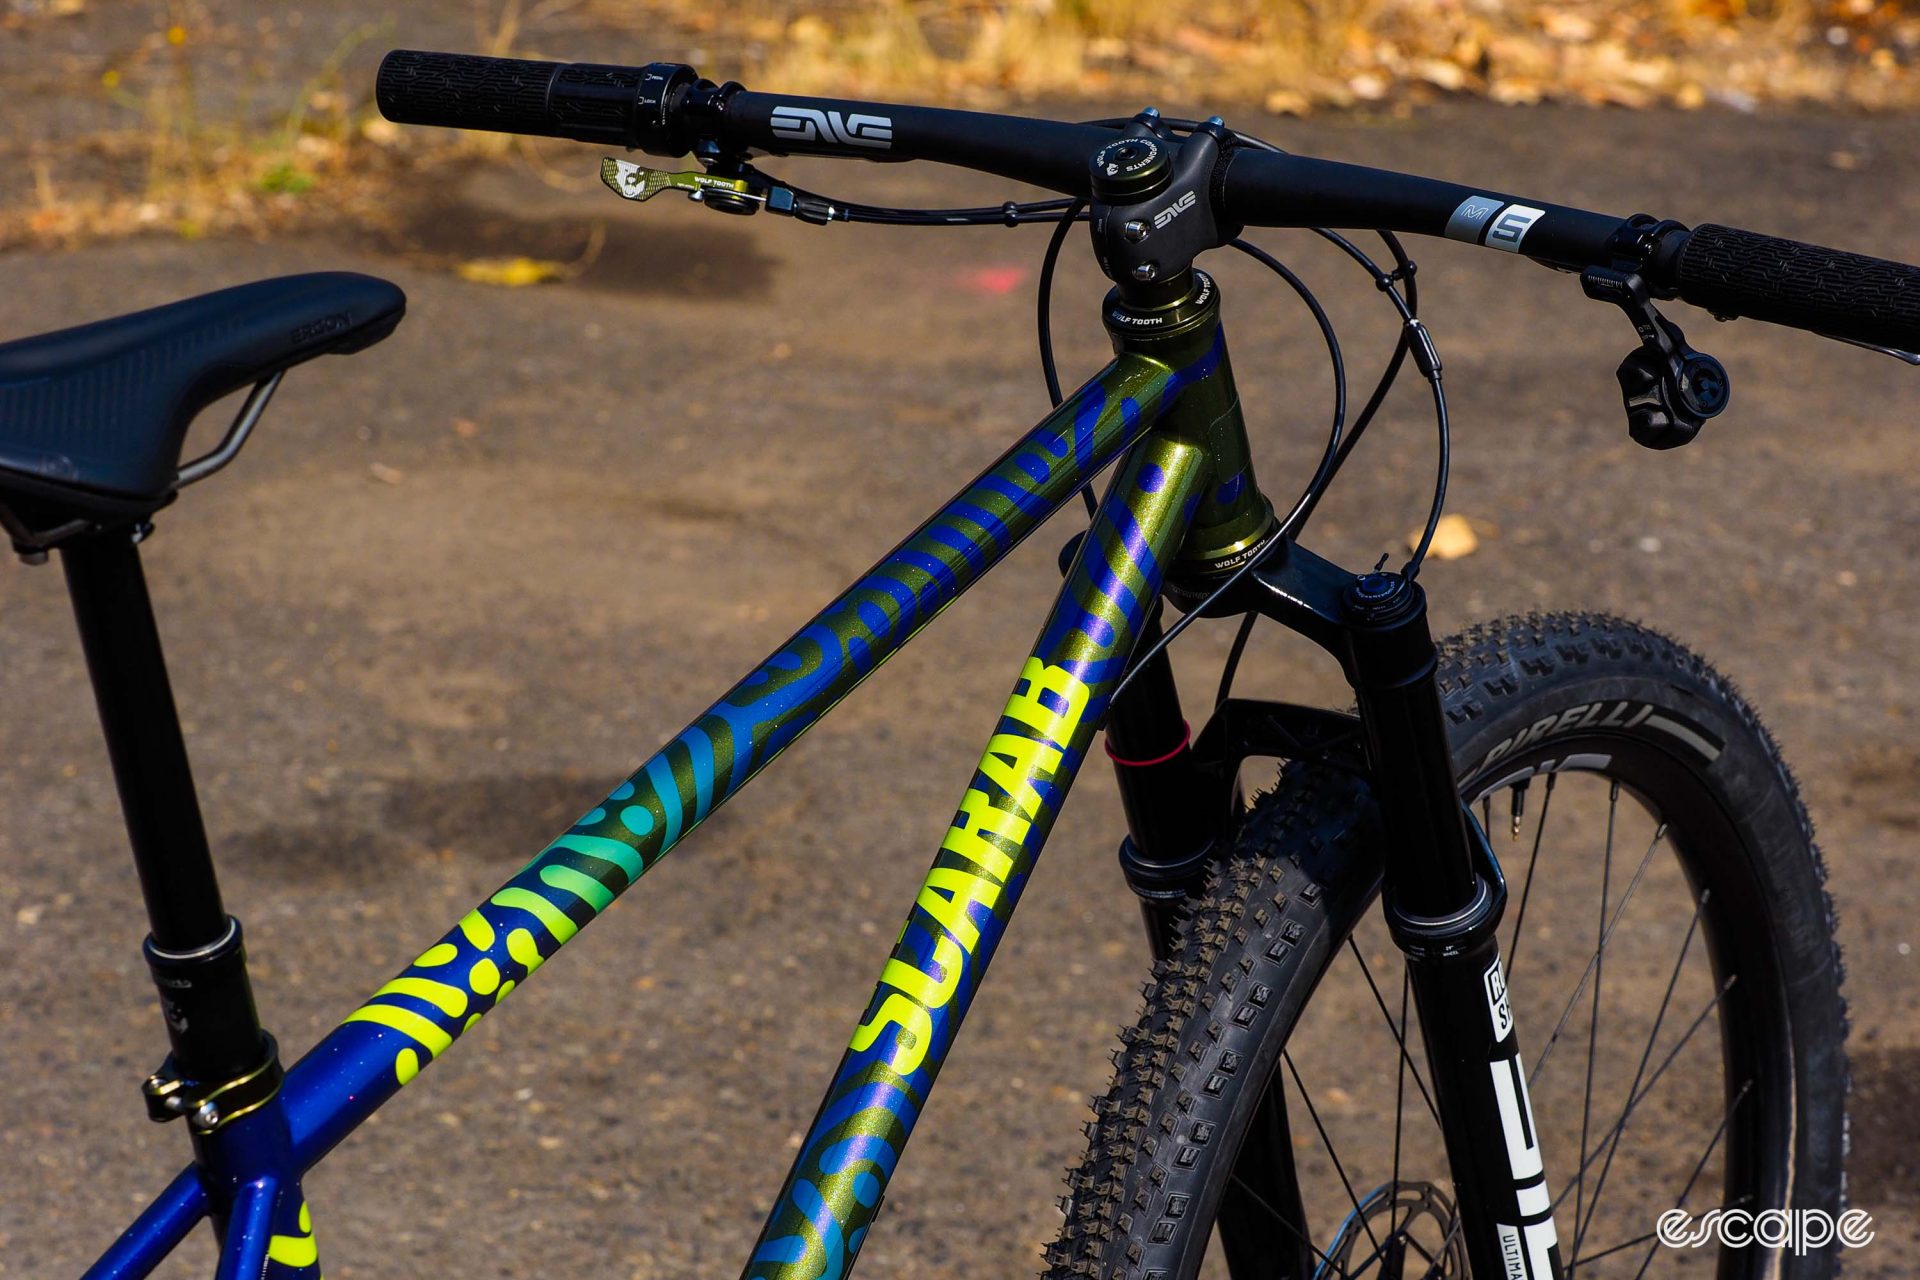 Scarab hardtail detail shot, showing an elaborate blue, green and yellow finish. 